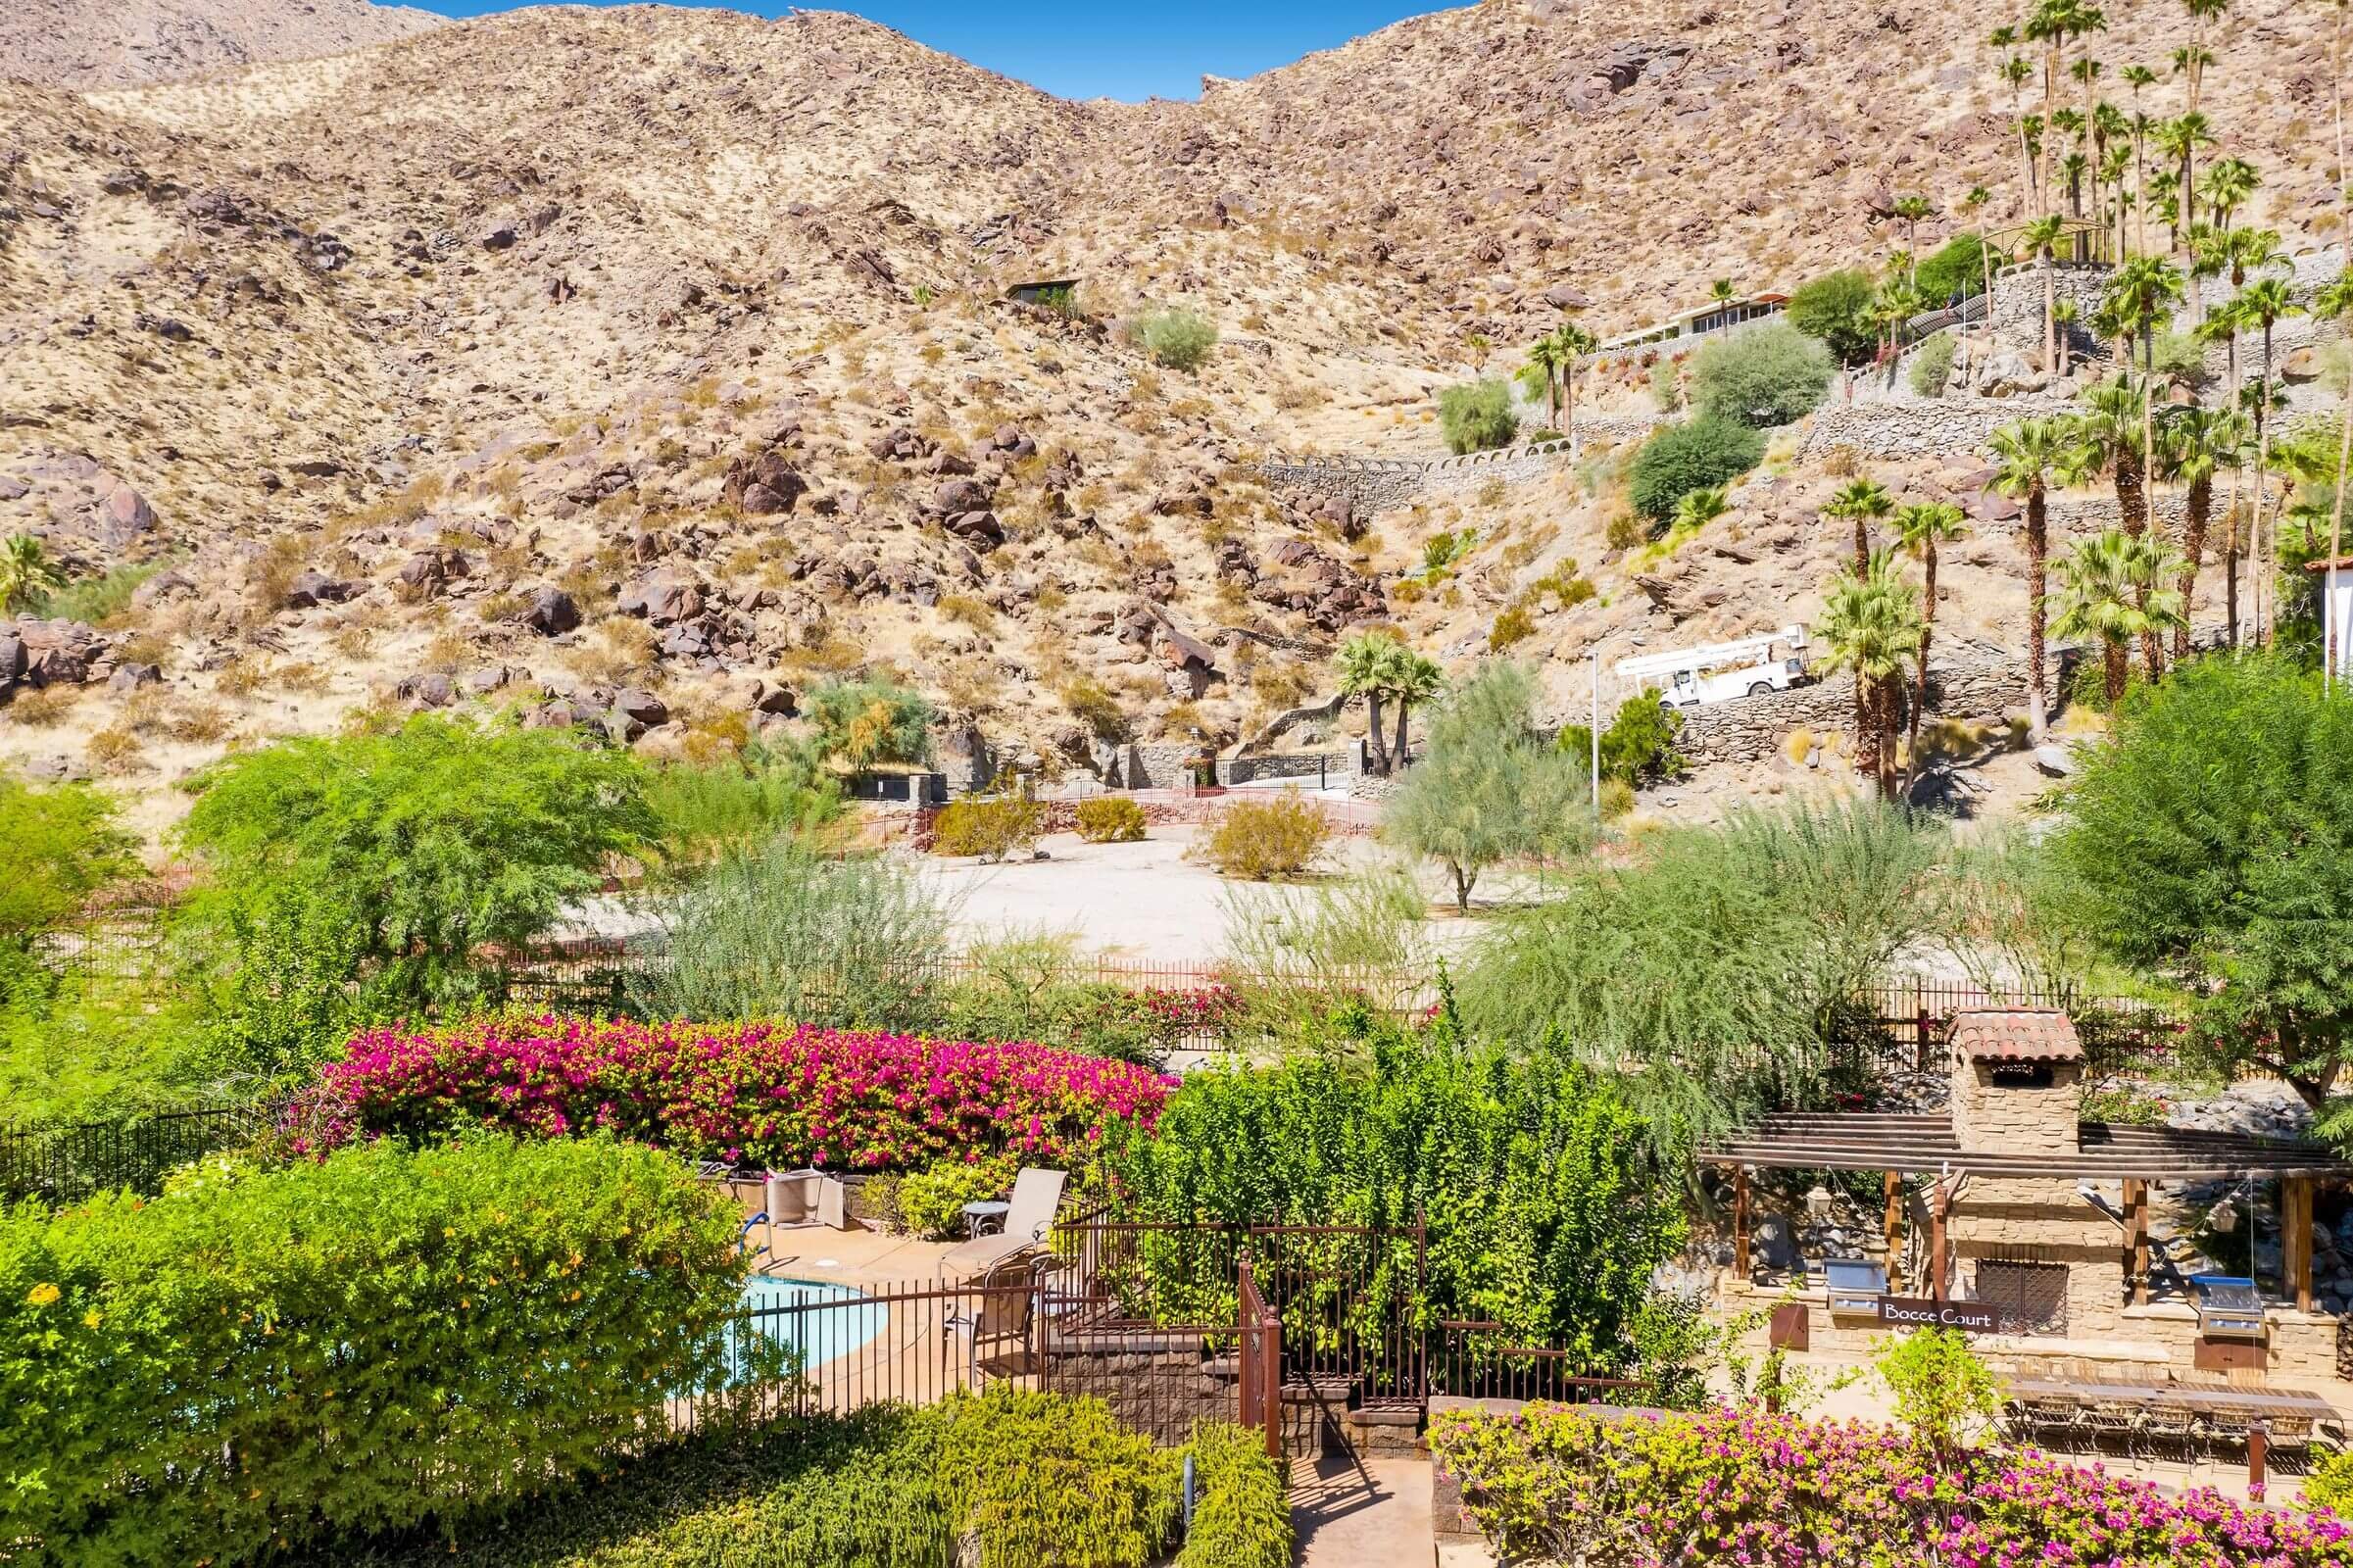 The Villas in Old Palm Springs Community